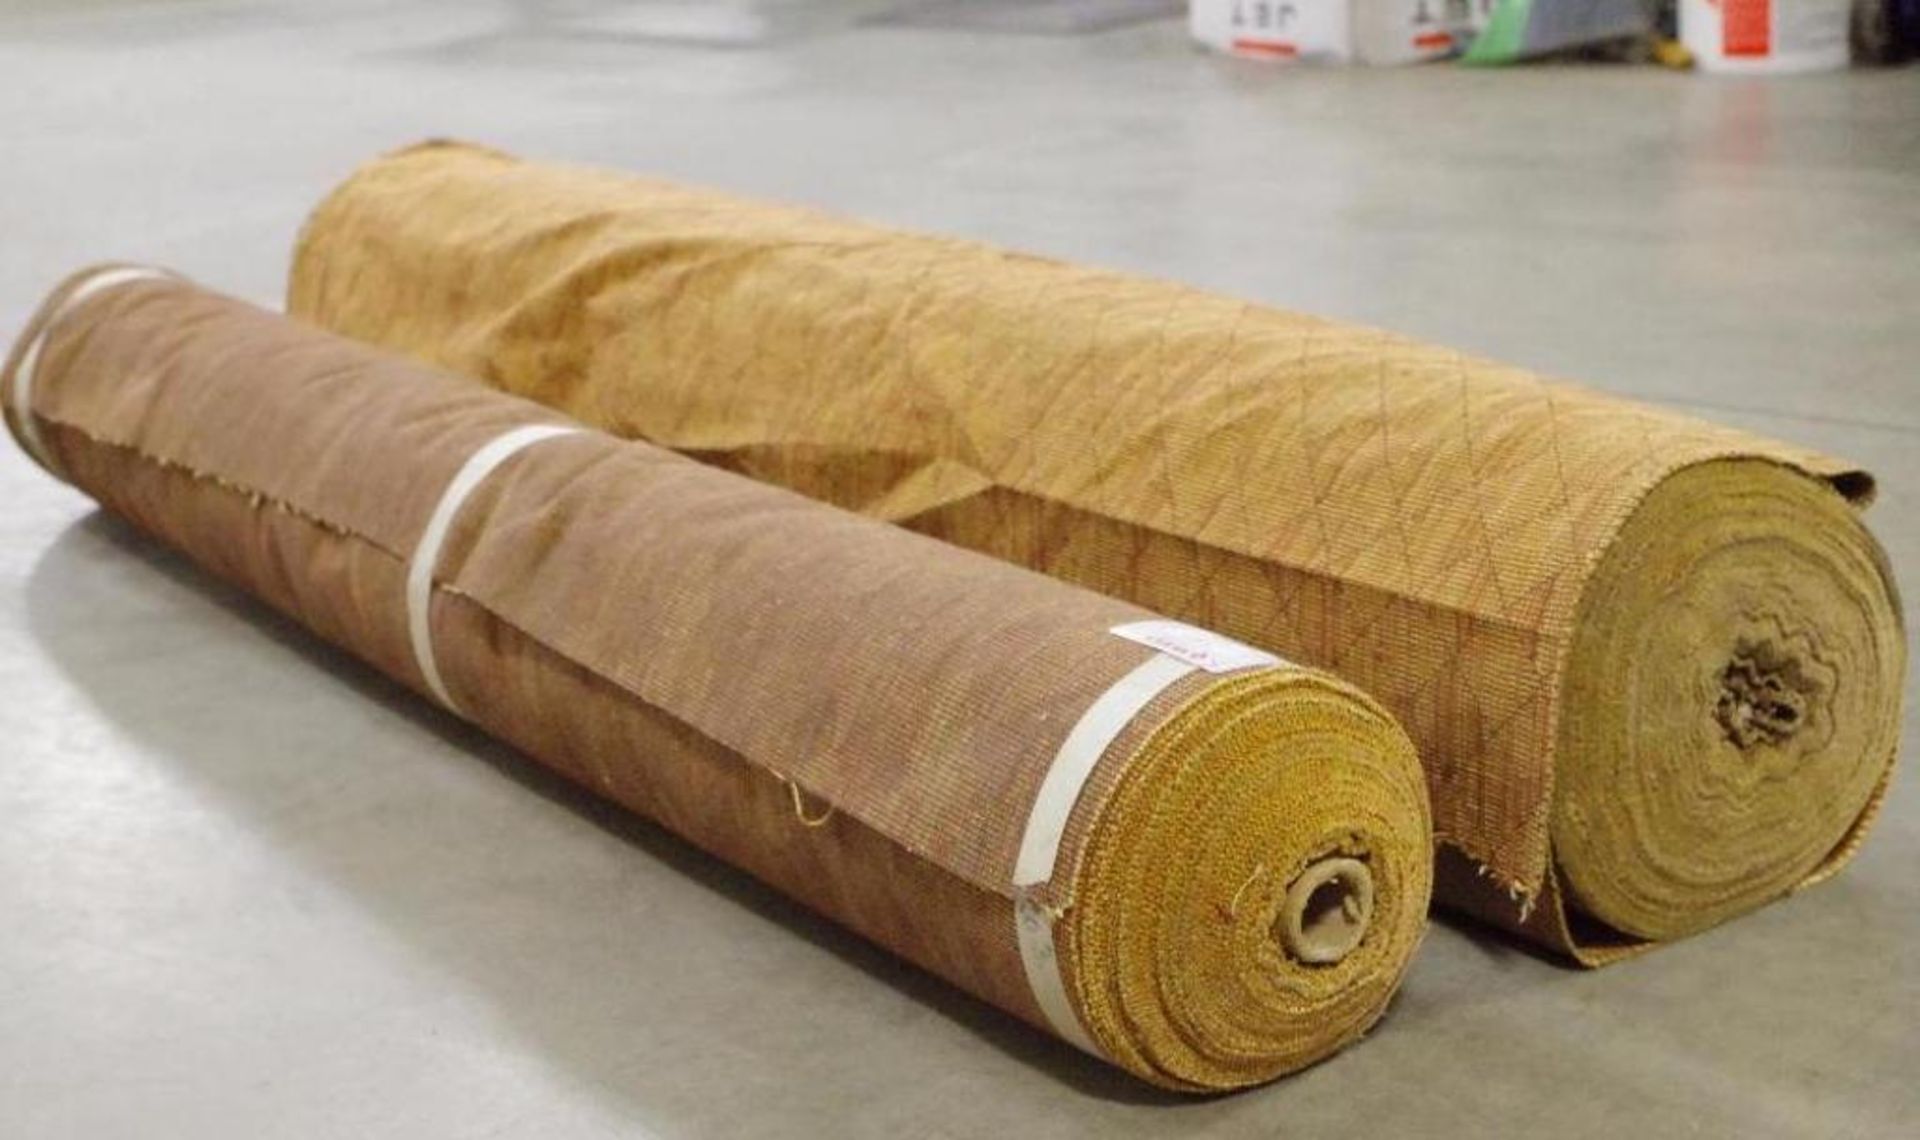 (2) Rolls of Fabric, Both are 57"W, One Roll 10" Diameter & Other 7" Diameter